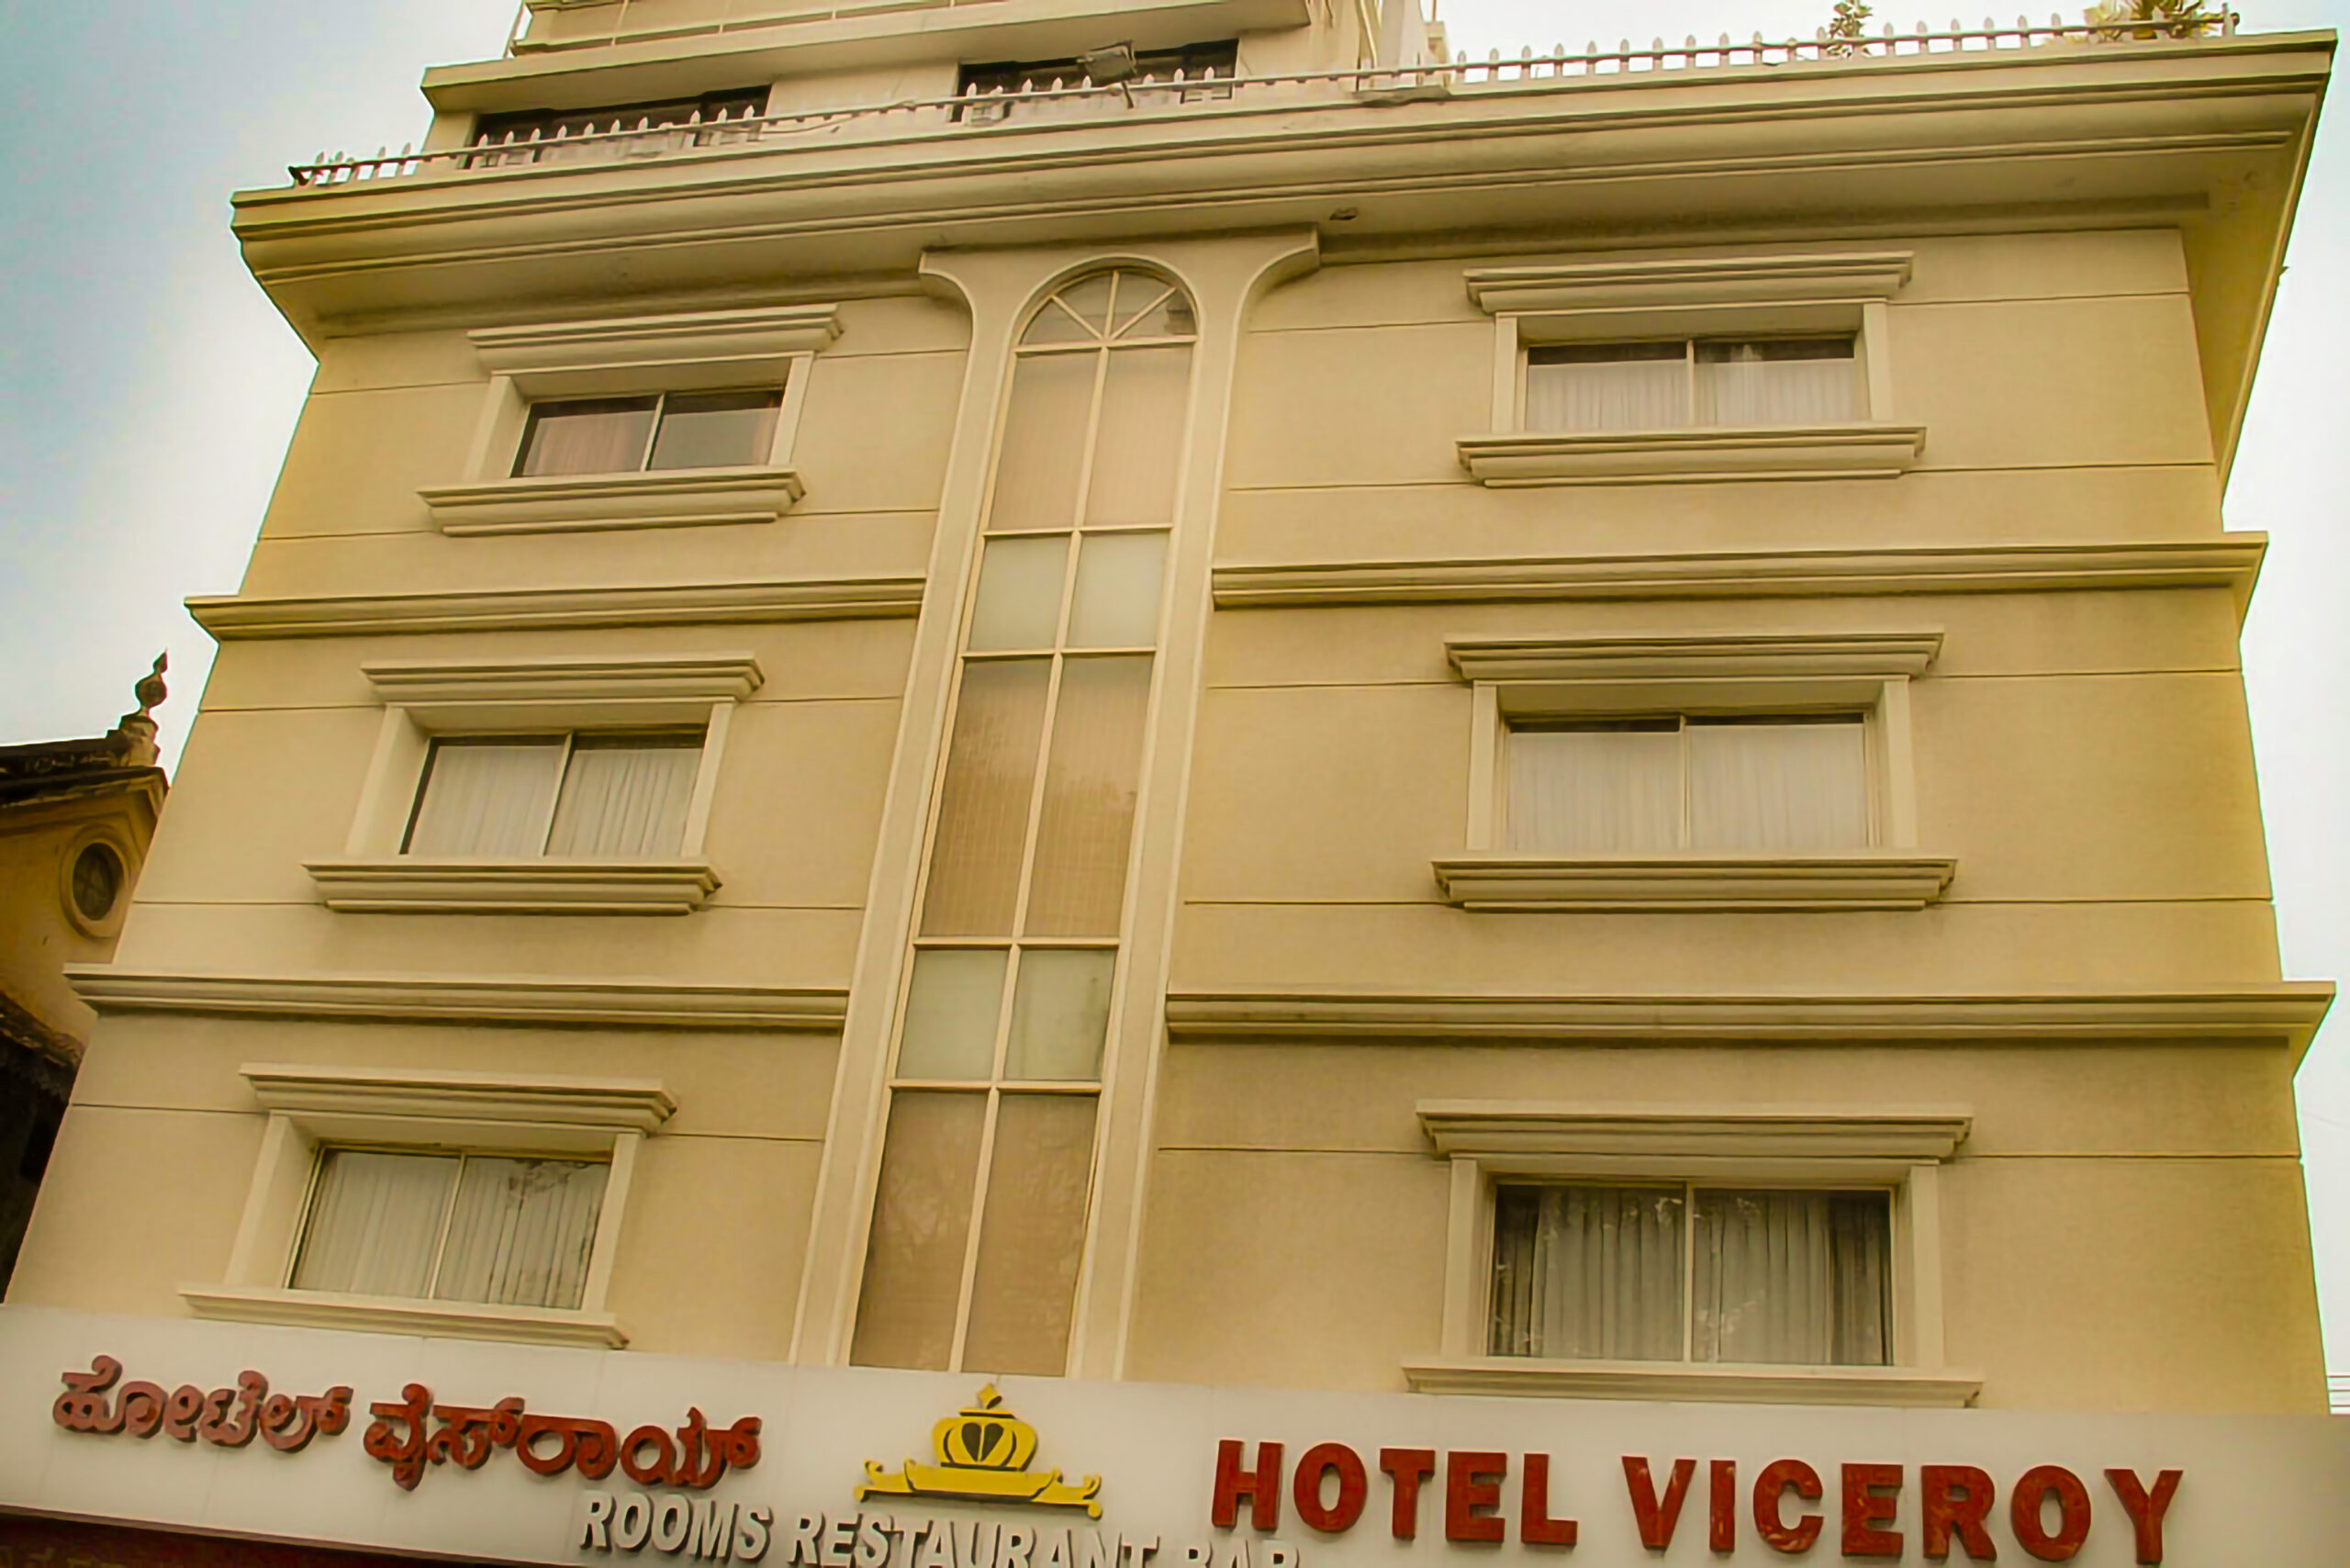 27 HOTEL THE VICEROY Scaled, RUURAA